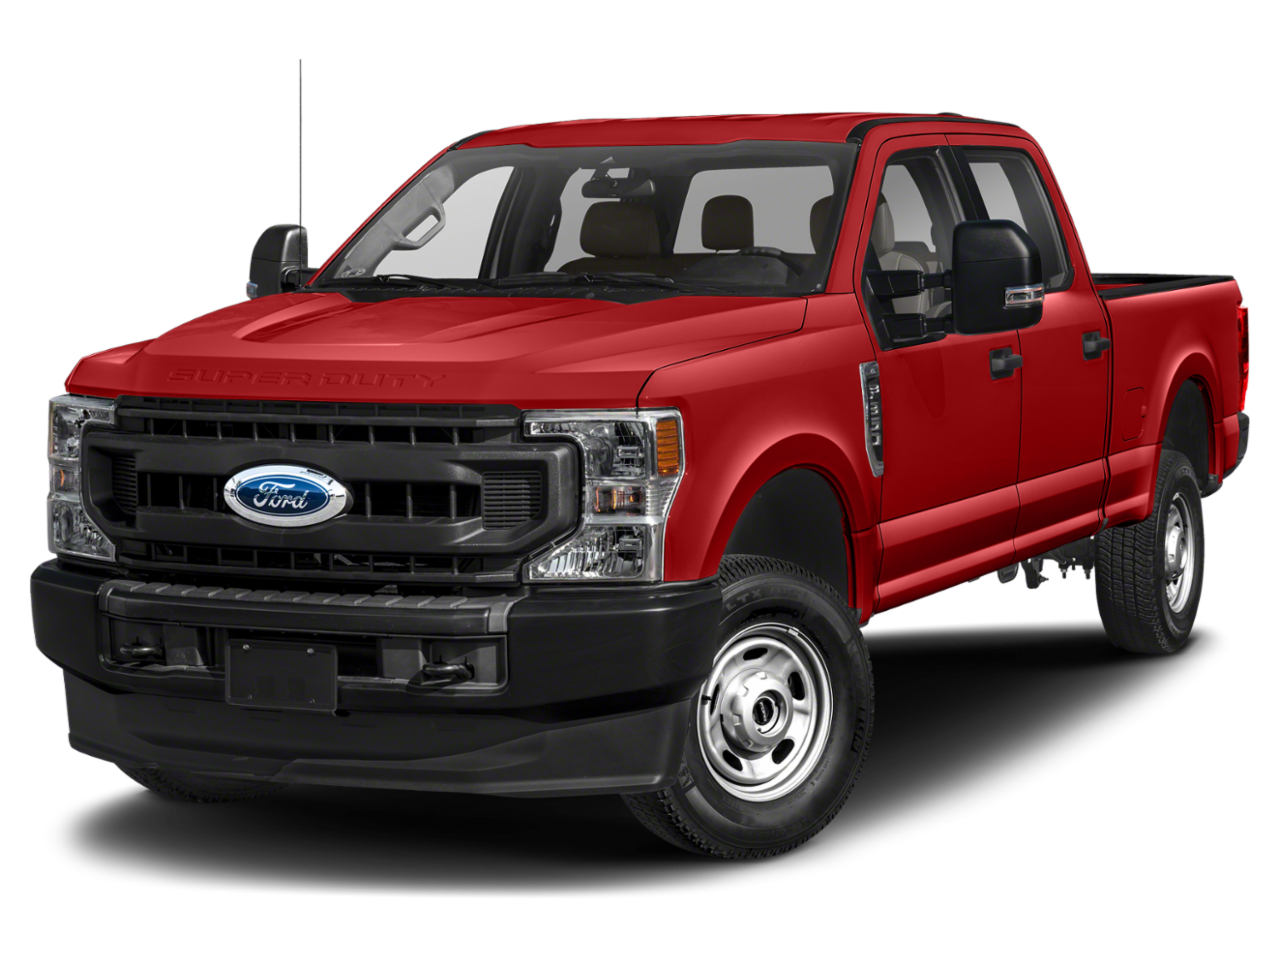 New Ford Super Duty F350 SRW from your Weatherford, TX dealership